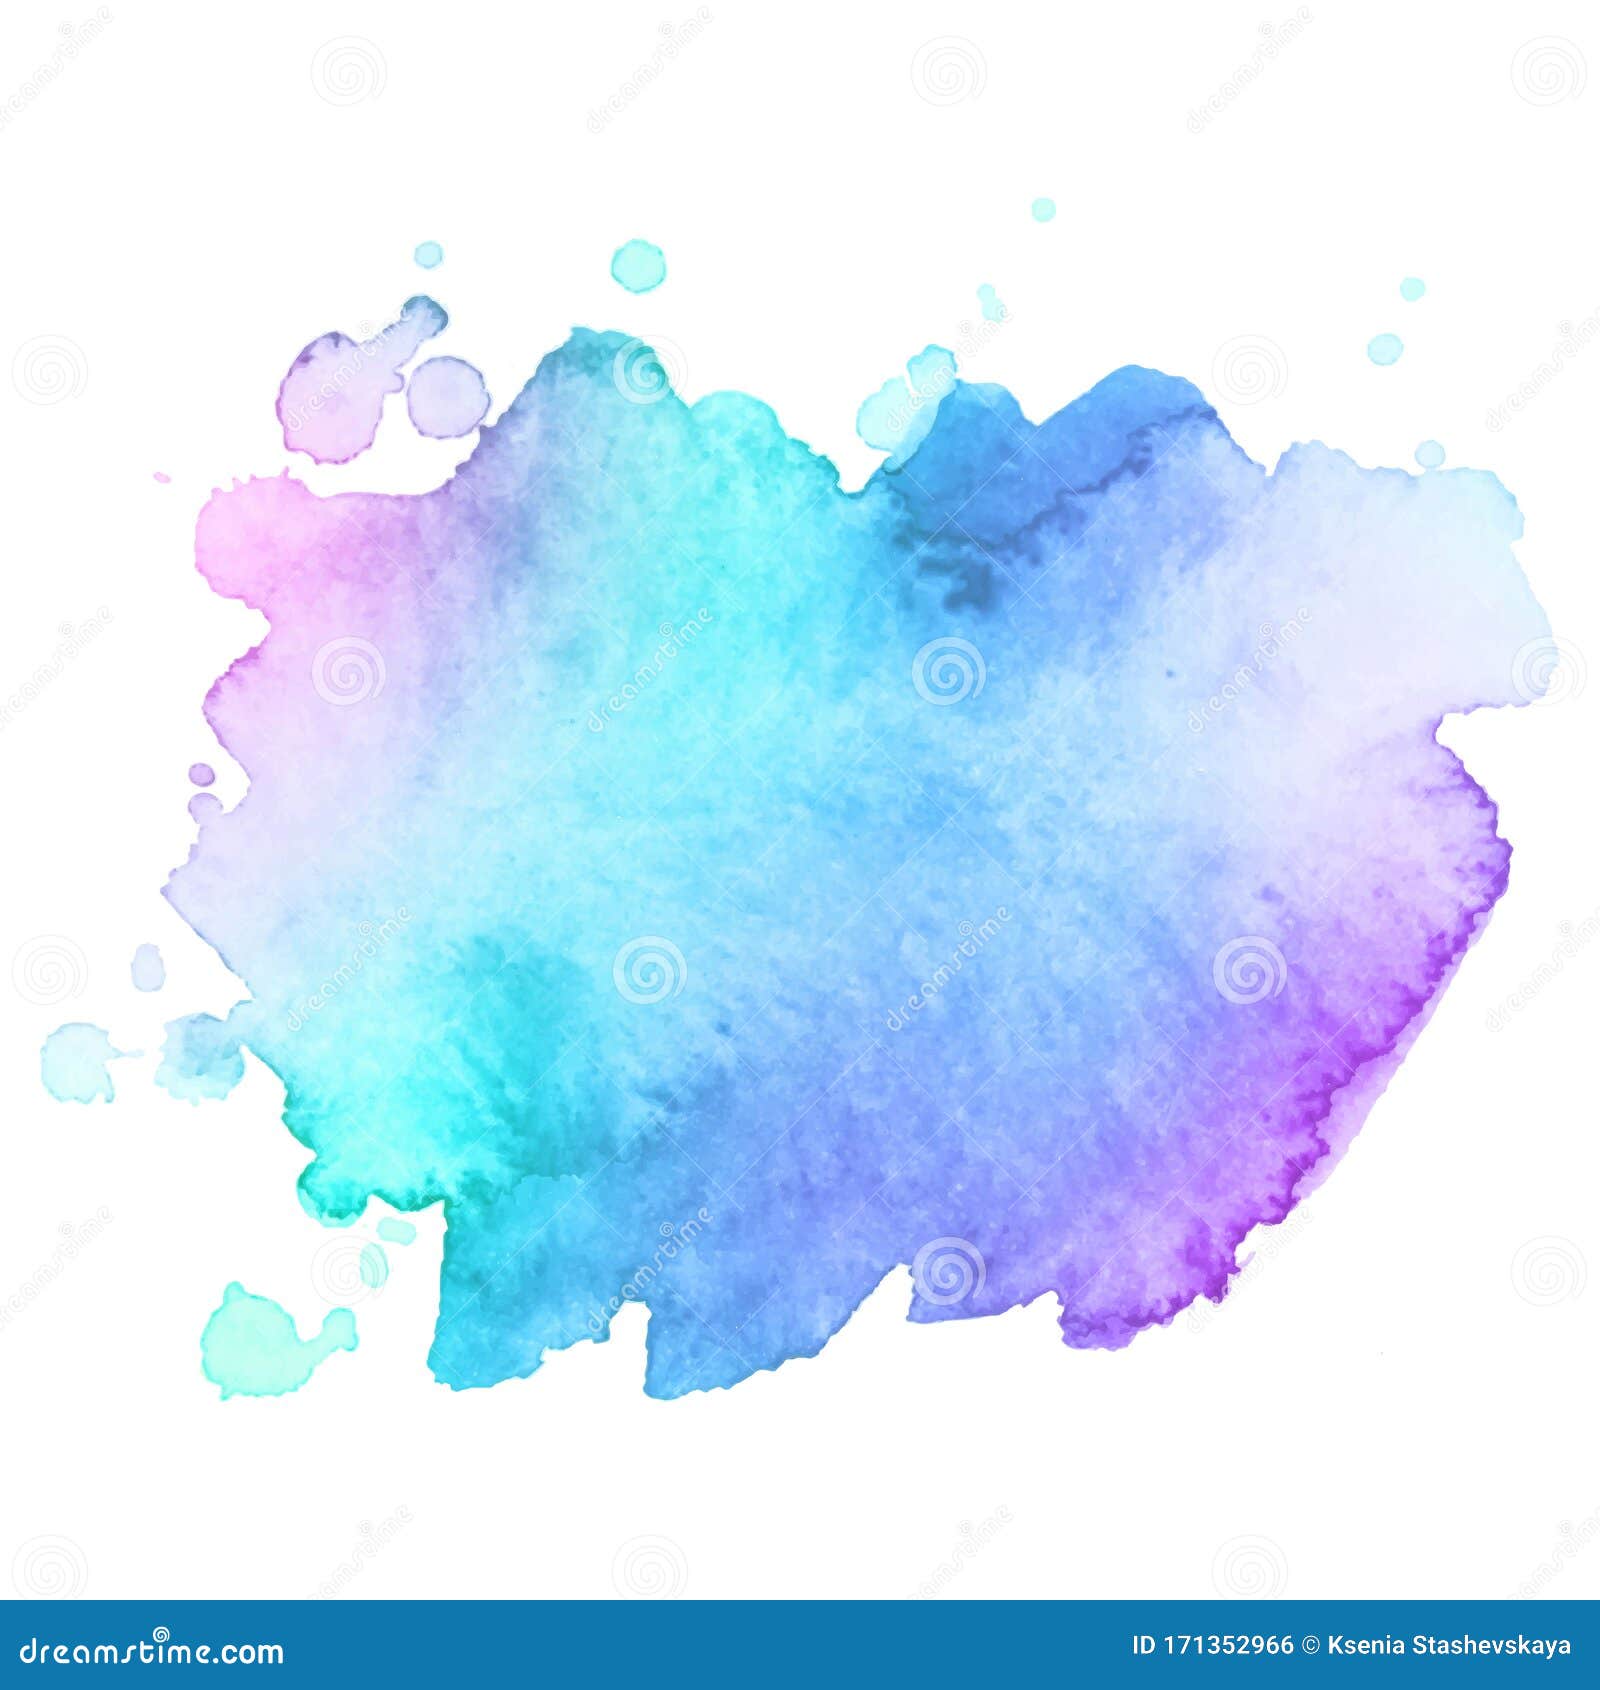 Watercolor Brush Paint Paper Texture Vector Isolated Splash on White  Background for Banner, Poster, Wallpaper. Stock Vector - Illustration of  element, abstract: 171352966